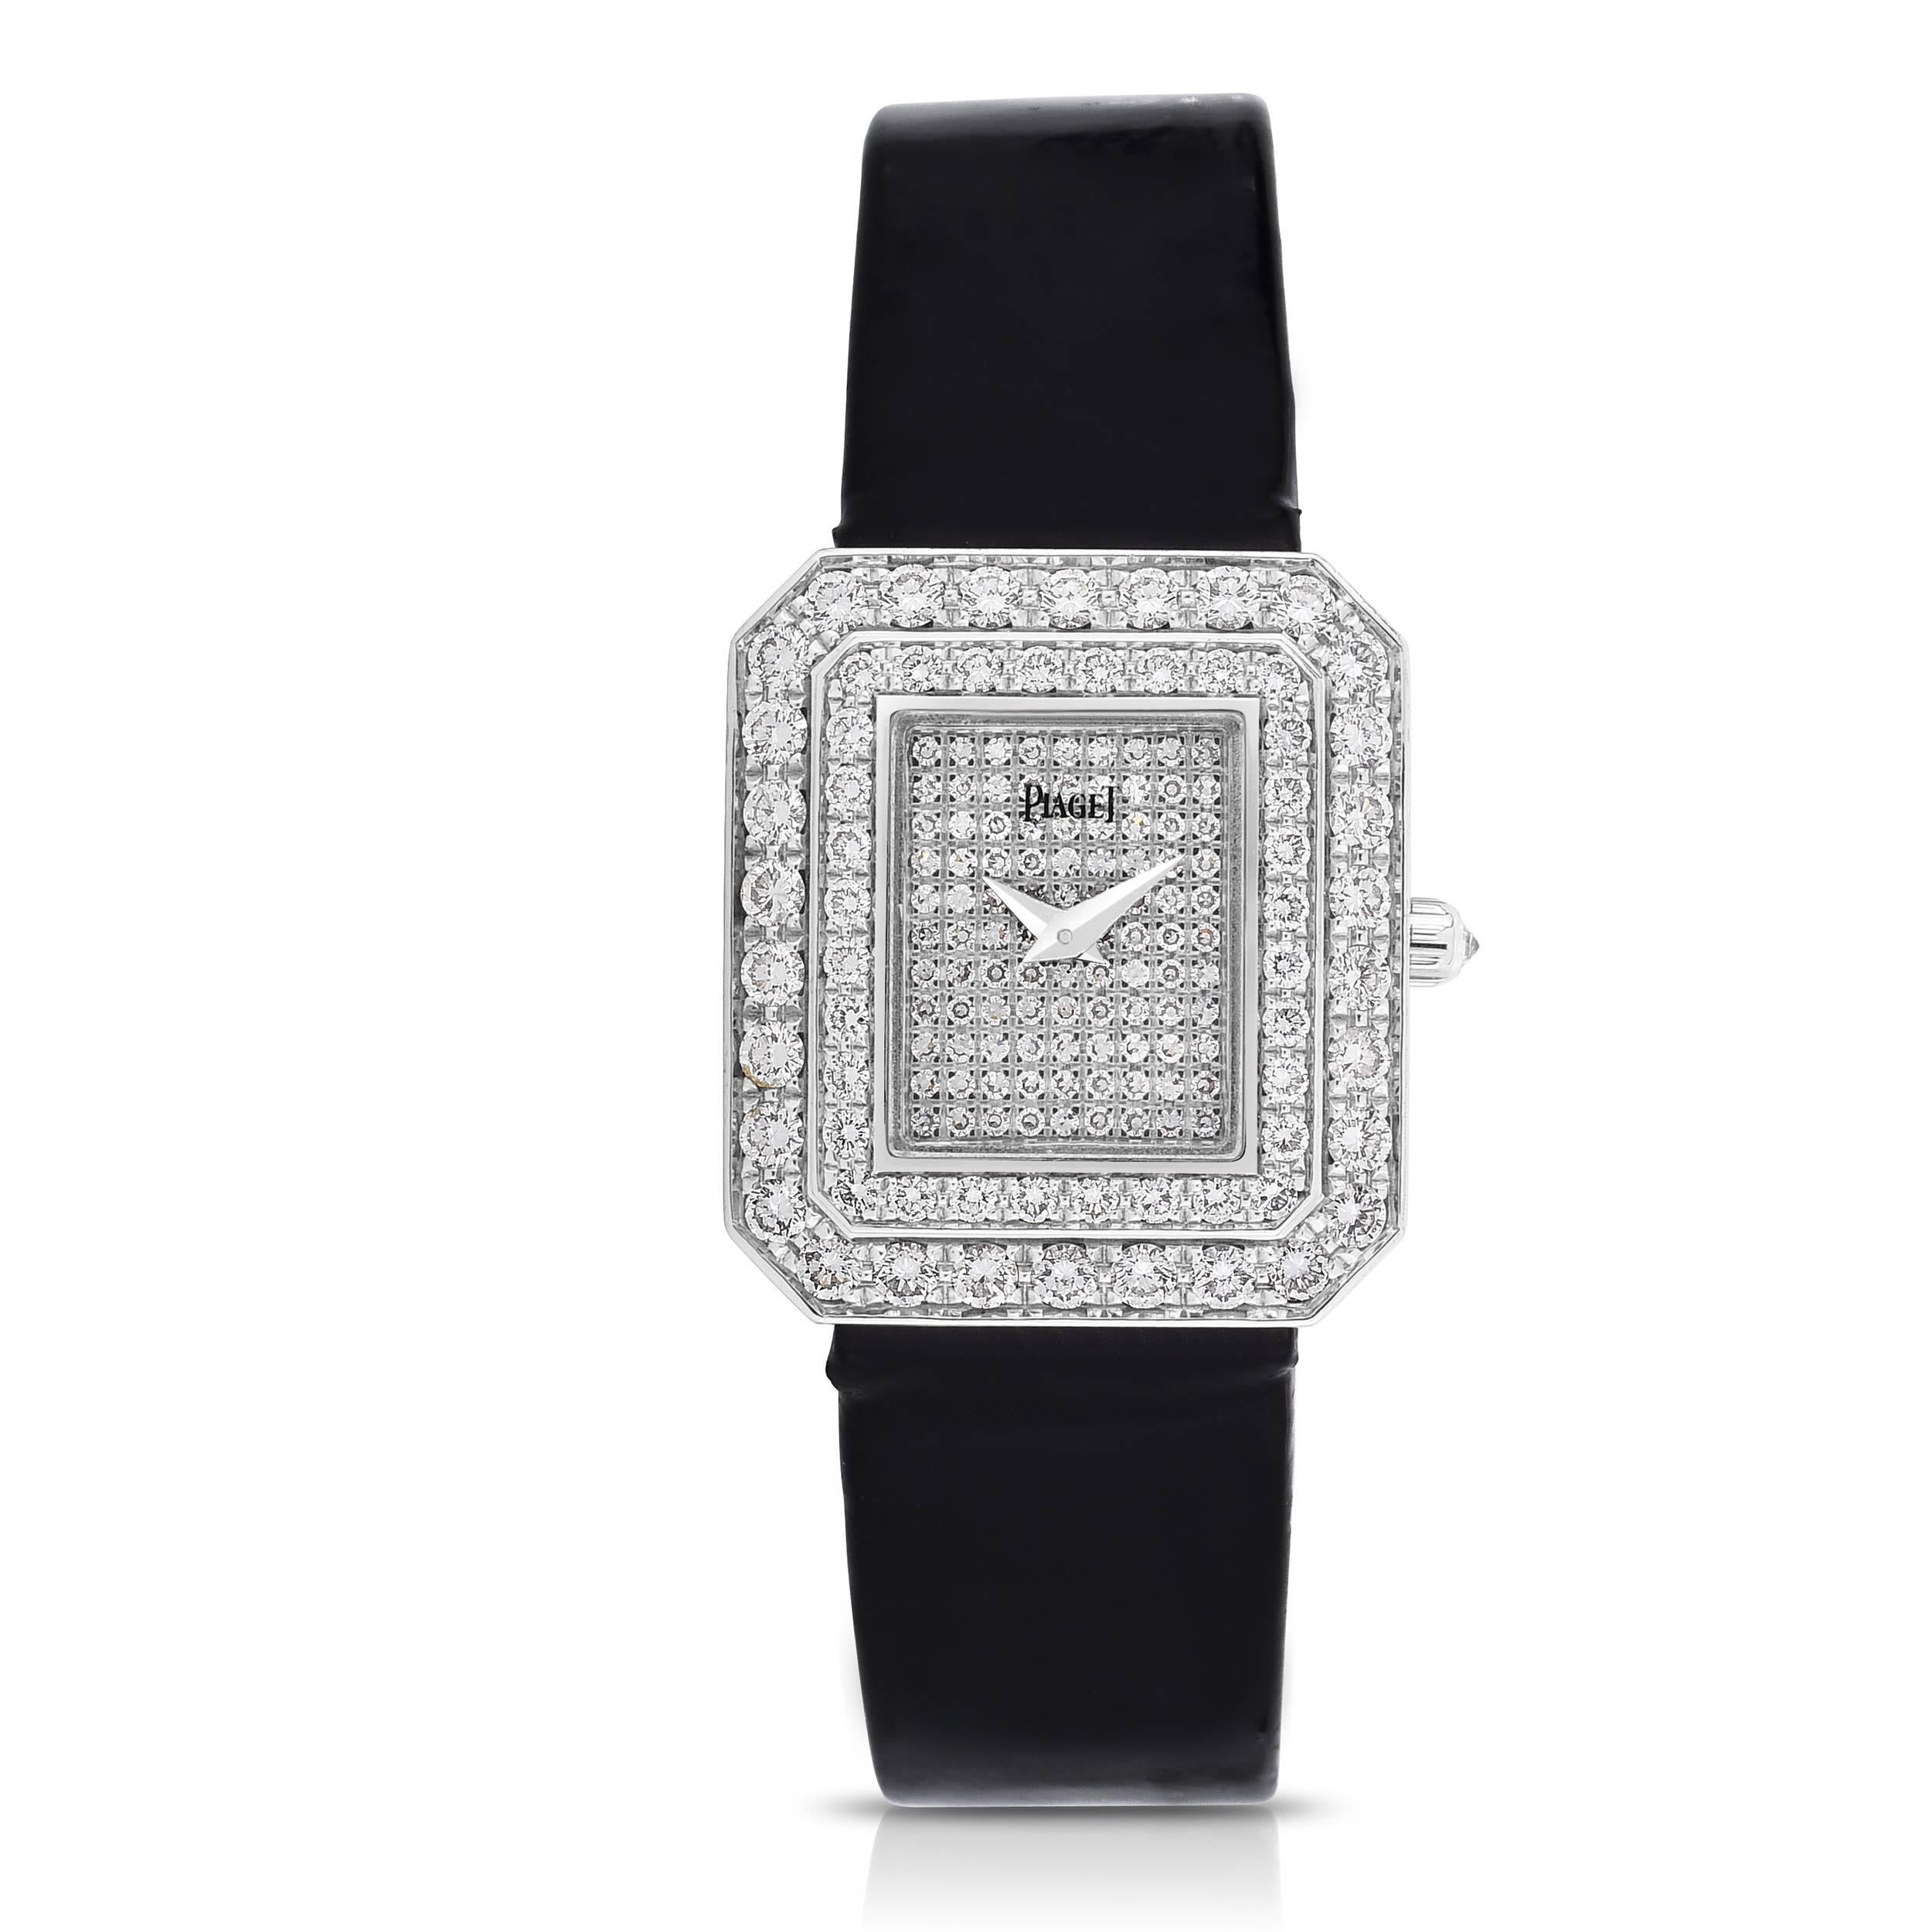 Ladies Piaget Protocole 18K White Gold and Diamond Dress Watch
Factory Diamond Dial, Bezel and Case
Quartz Movement 
Patent Leather Band
18K White Gold Deployment Buckle
Diamond Crown
In Pristine Condition
Fits Up to a 6.25